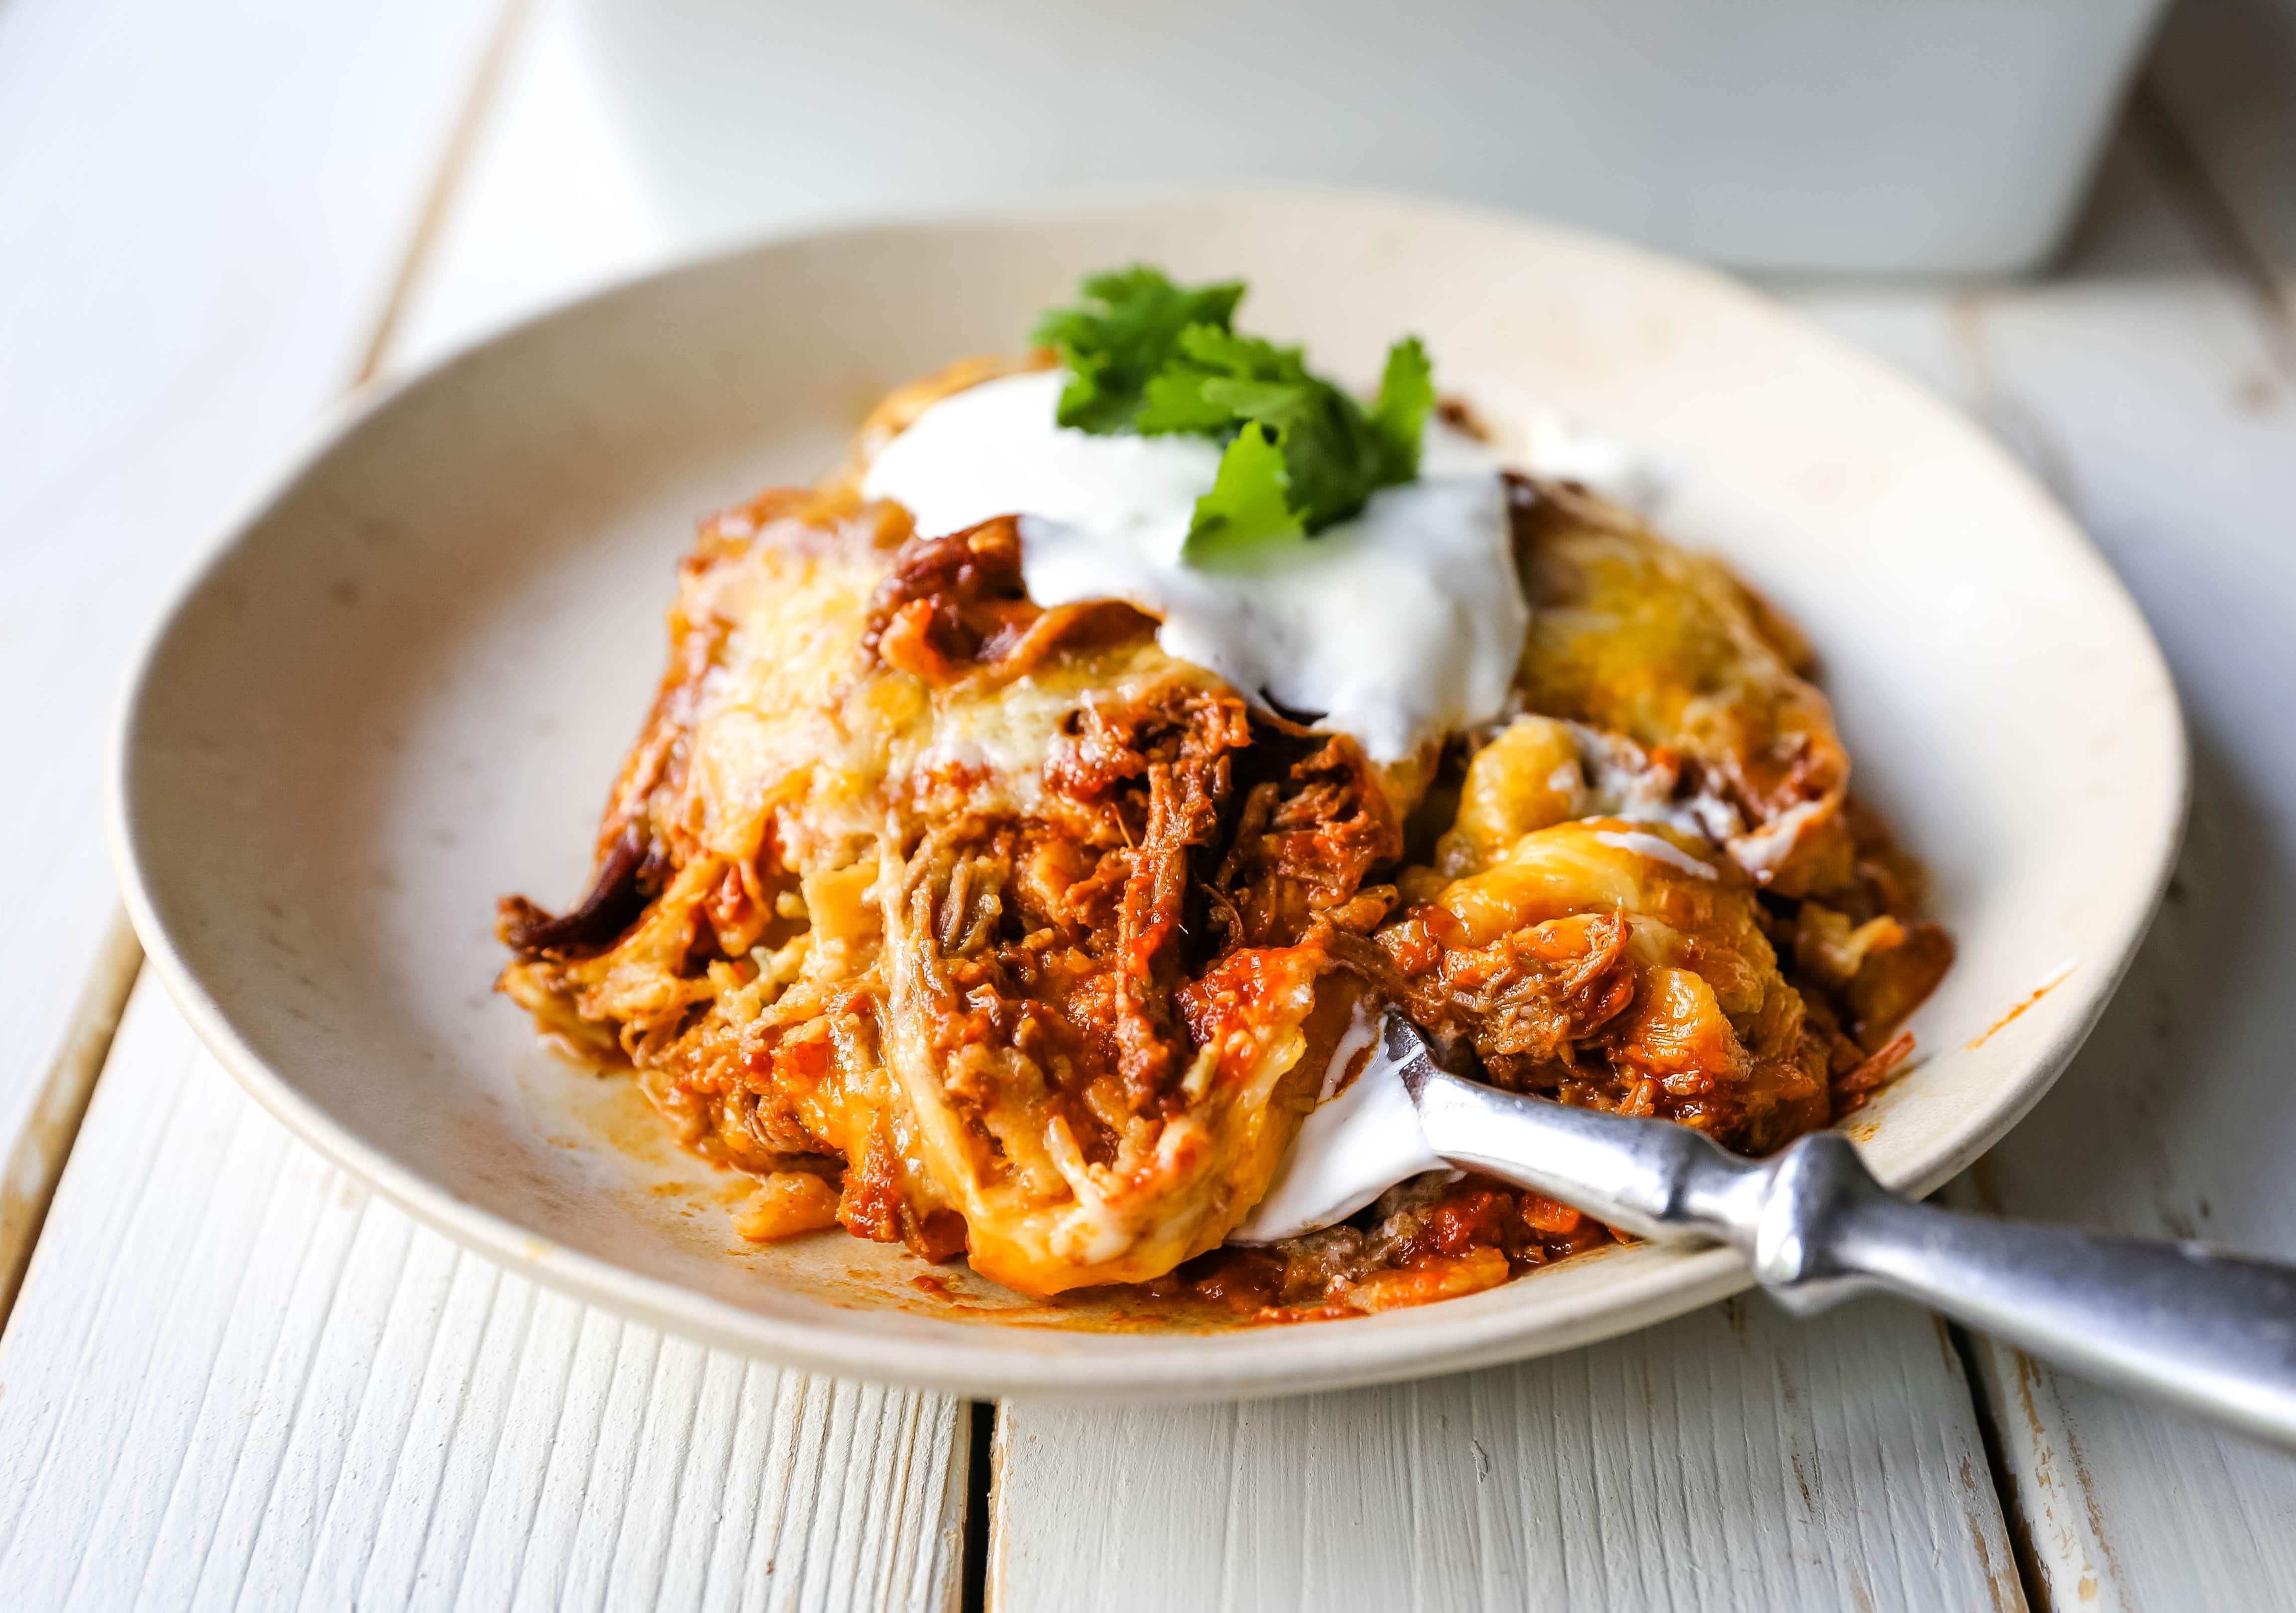 Stacked Beef Enchiladas. Mexican seasoned shredded beef enchiladas with melted cheese, corn tortillas, and homemade enchilada sauce. An easy beef enchilada casserole! #mexican #mexicanfood #enchiladas #beefenchiladas